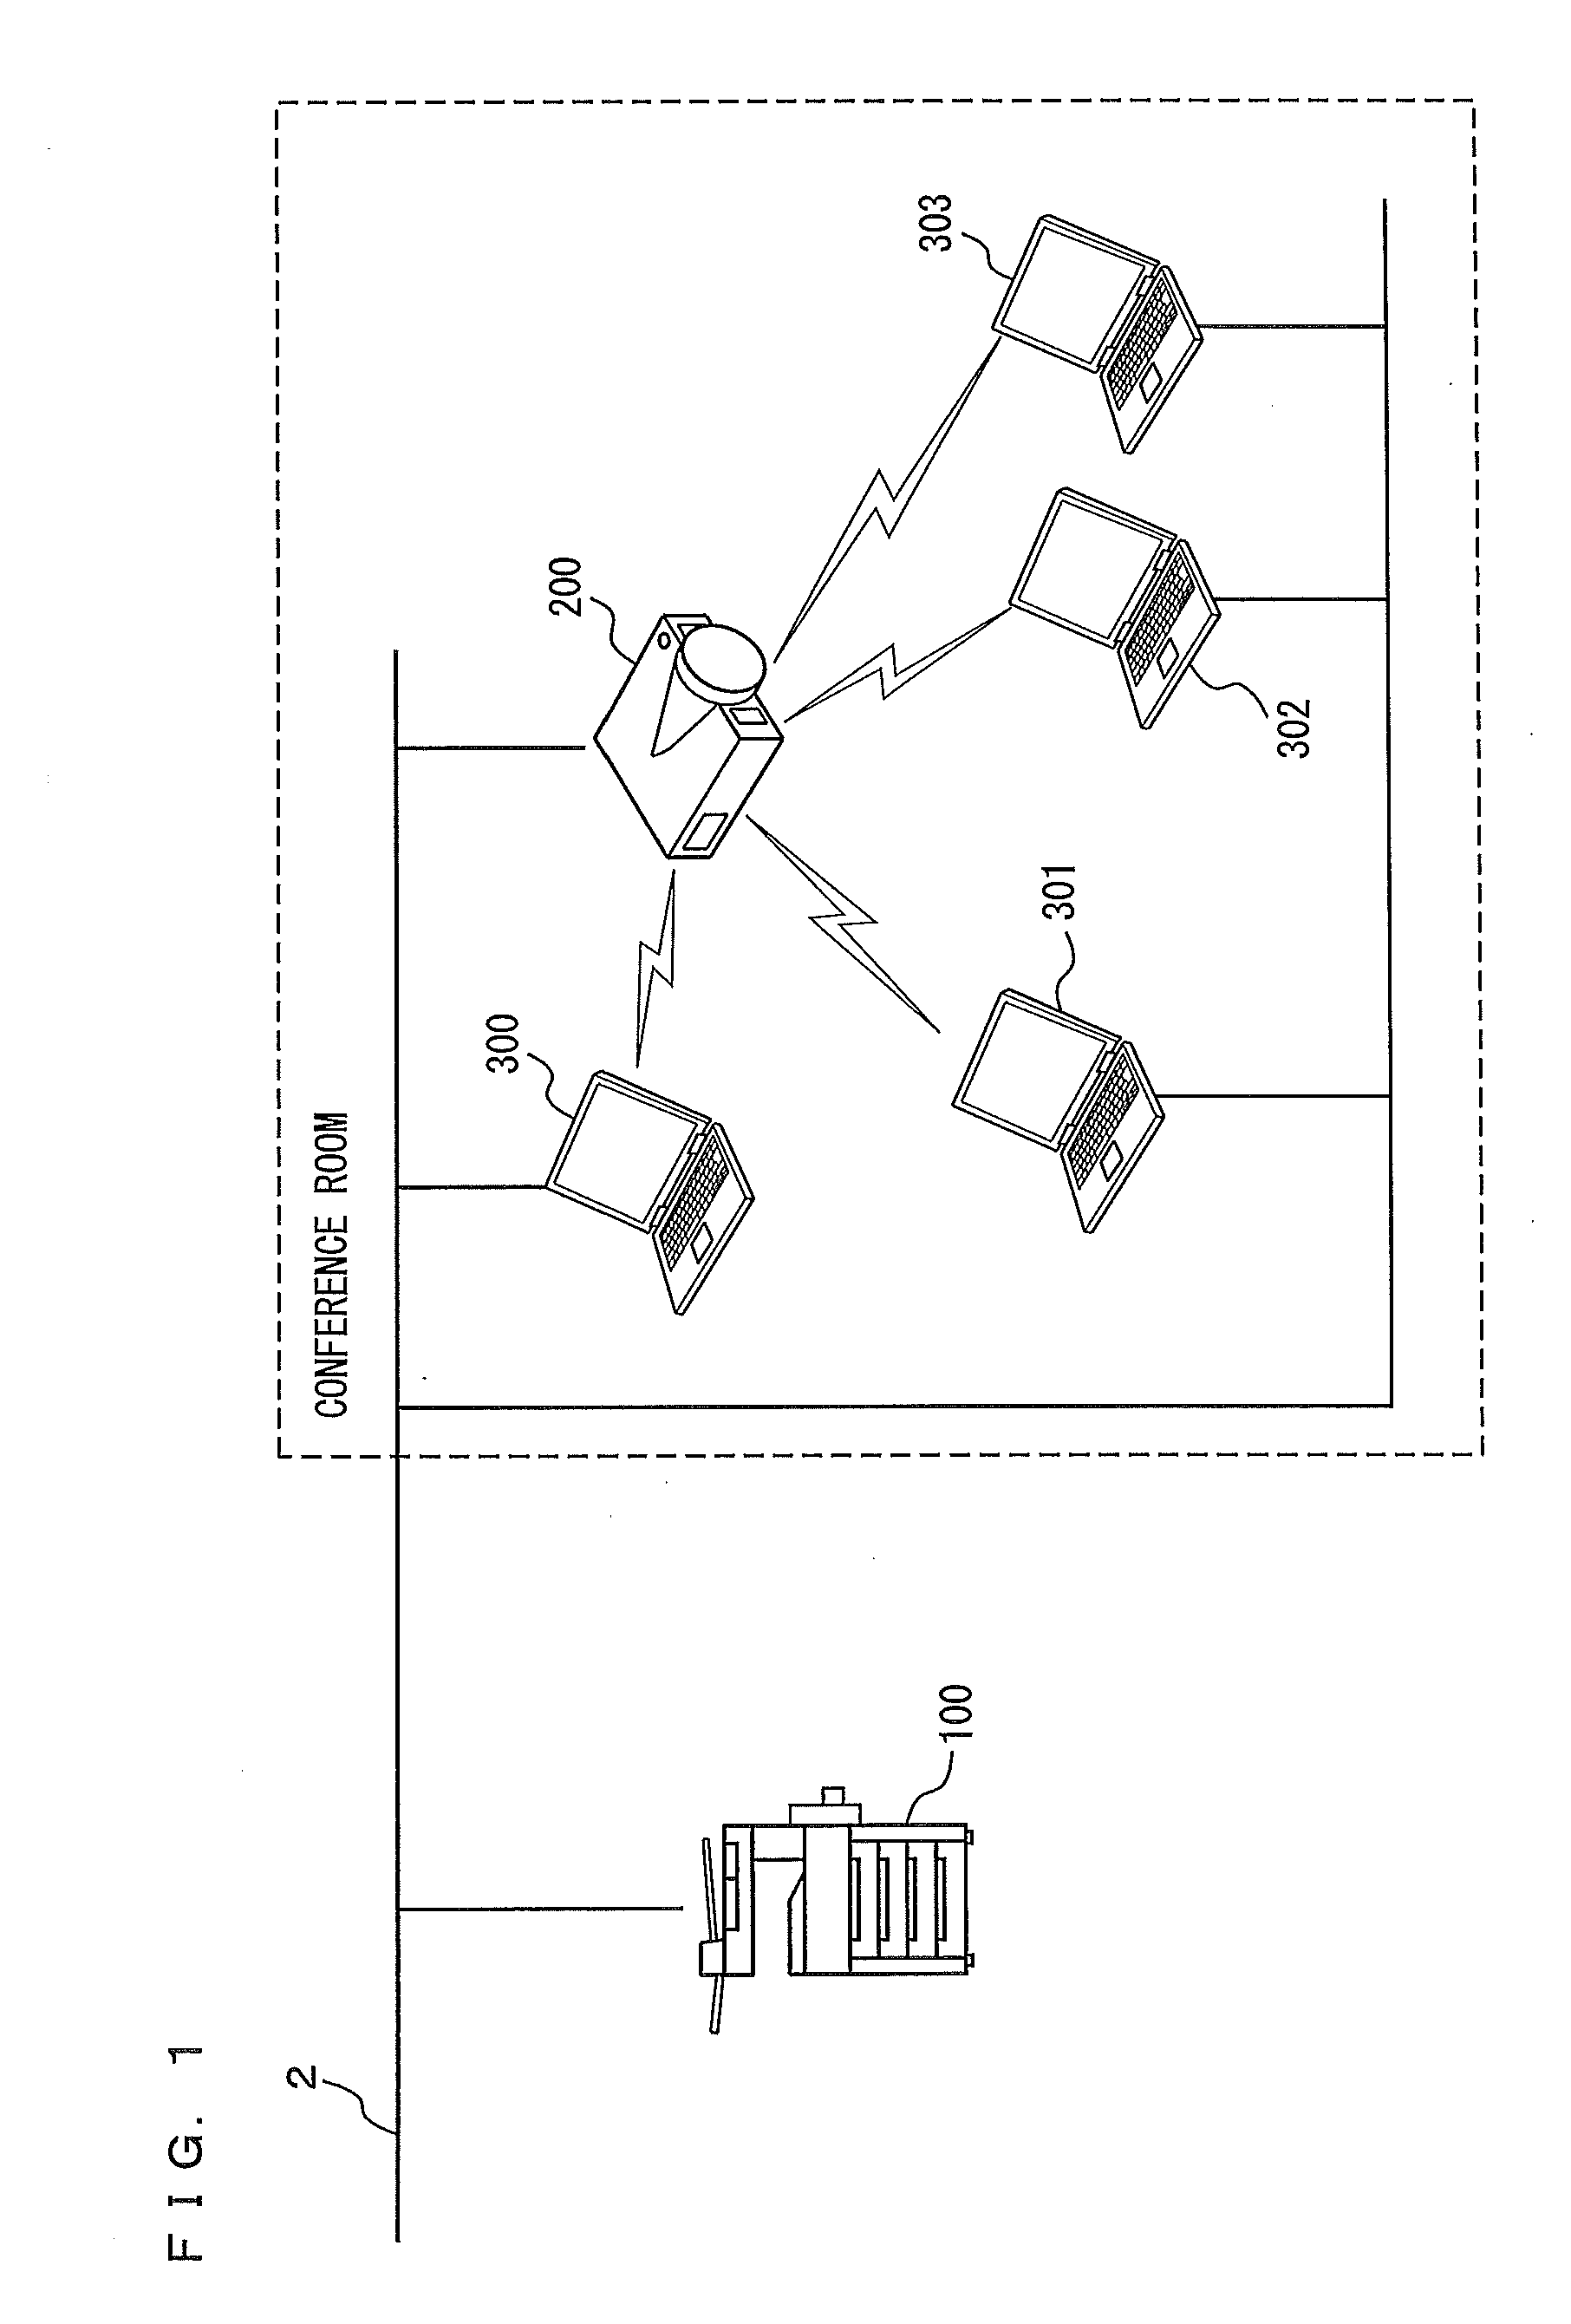 Management system including display apparatus and data management apparatus for displaying data on the display apparatus, and data acquisition method